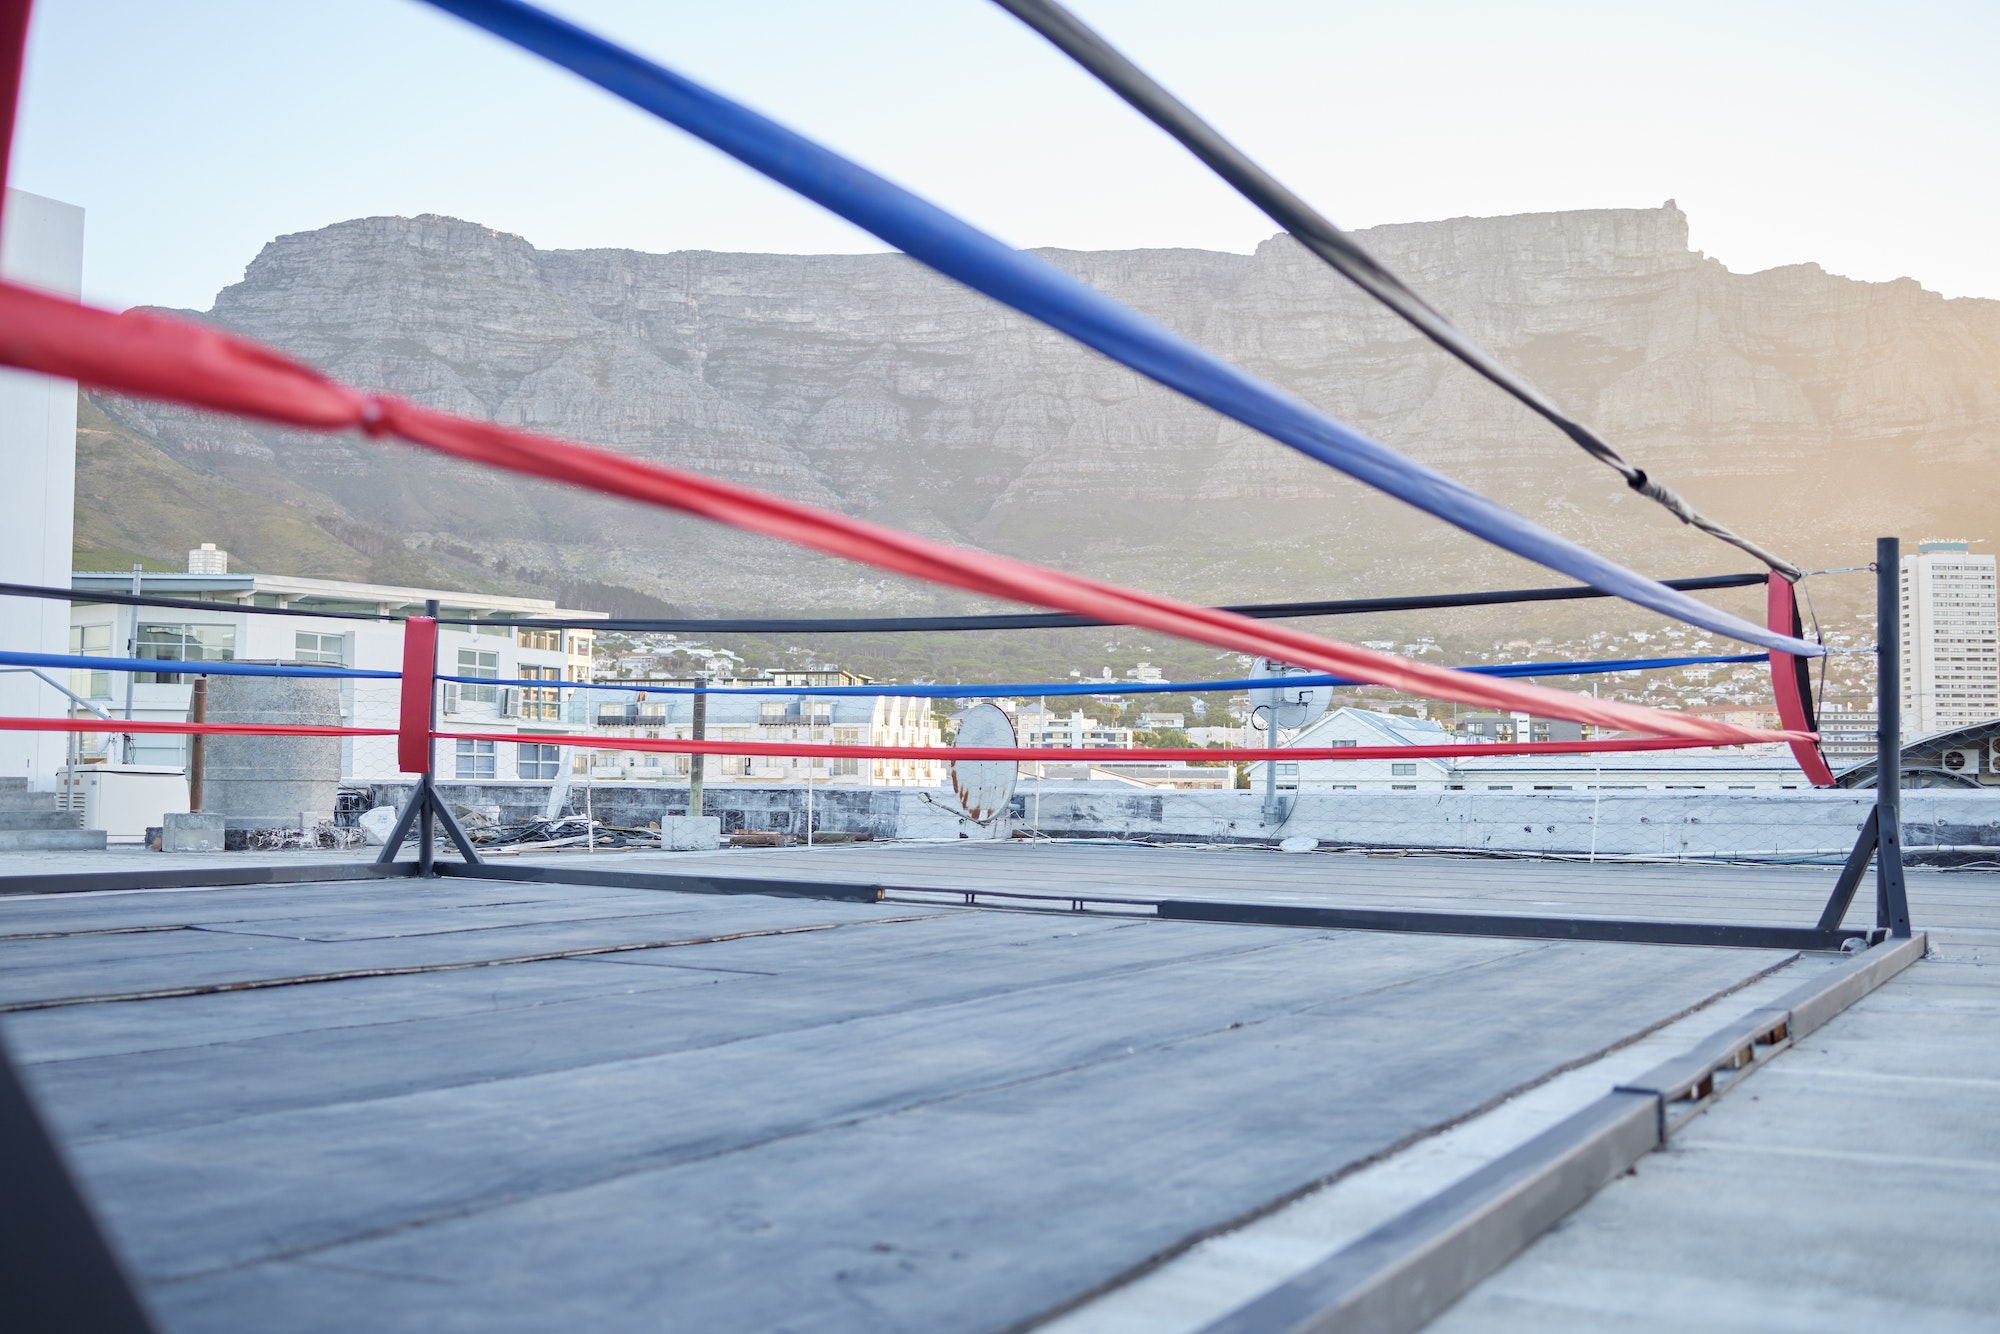 Outdoor, sports and boxing ring in the city for a wrestling competition for athletes or boxers. Out